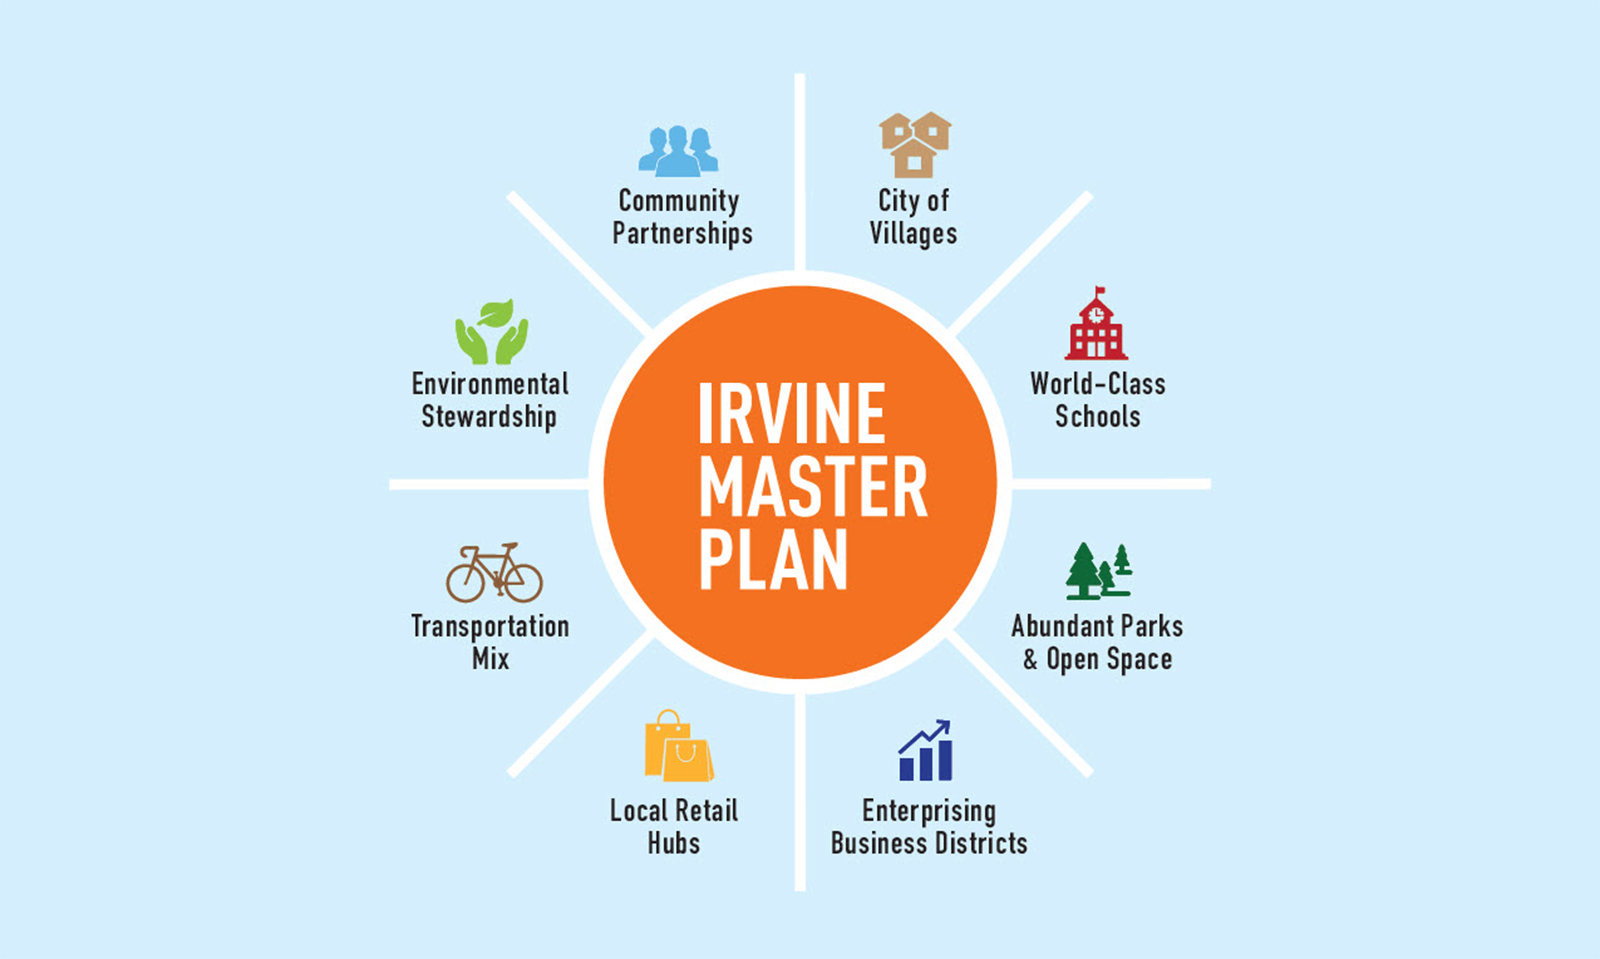 What is the Irvine Master Plan?